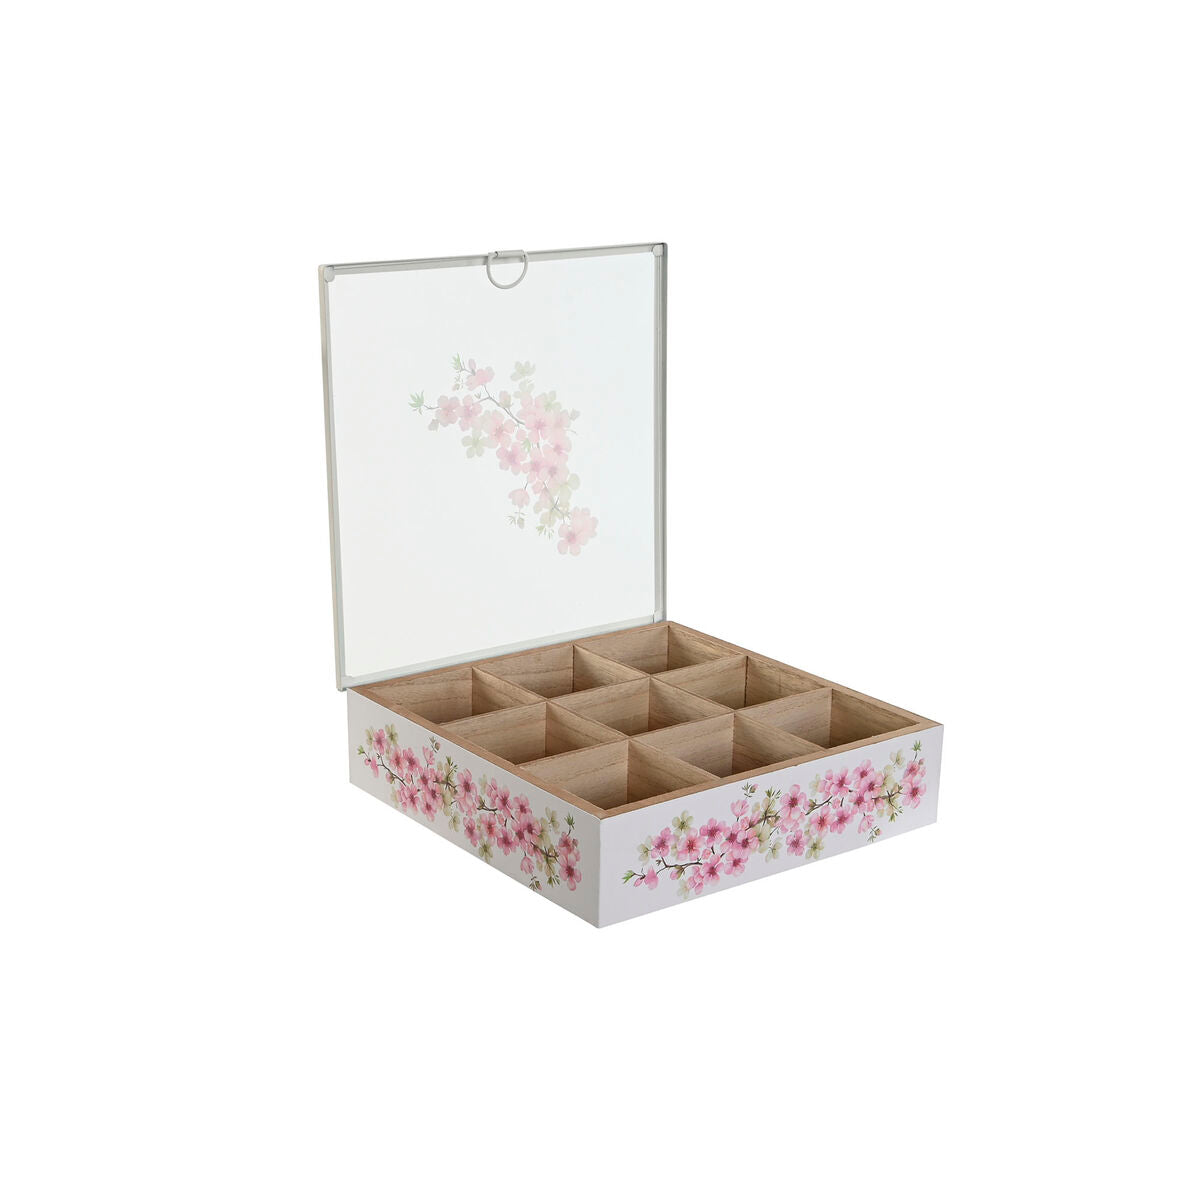 Box for Infusions Home ESPRIT Wit Roze Metaal Kristal Hout MDF 24 x 24 x 6,5 cm (2 Stuks)